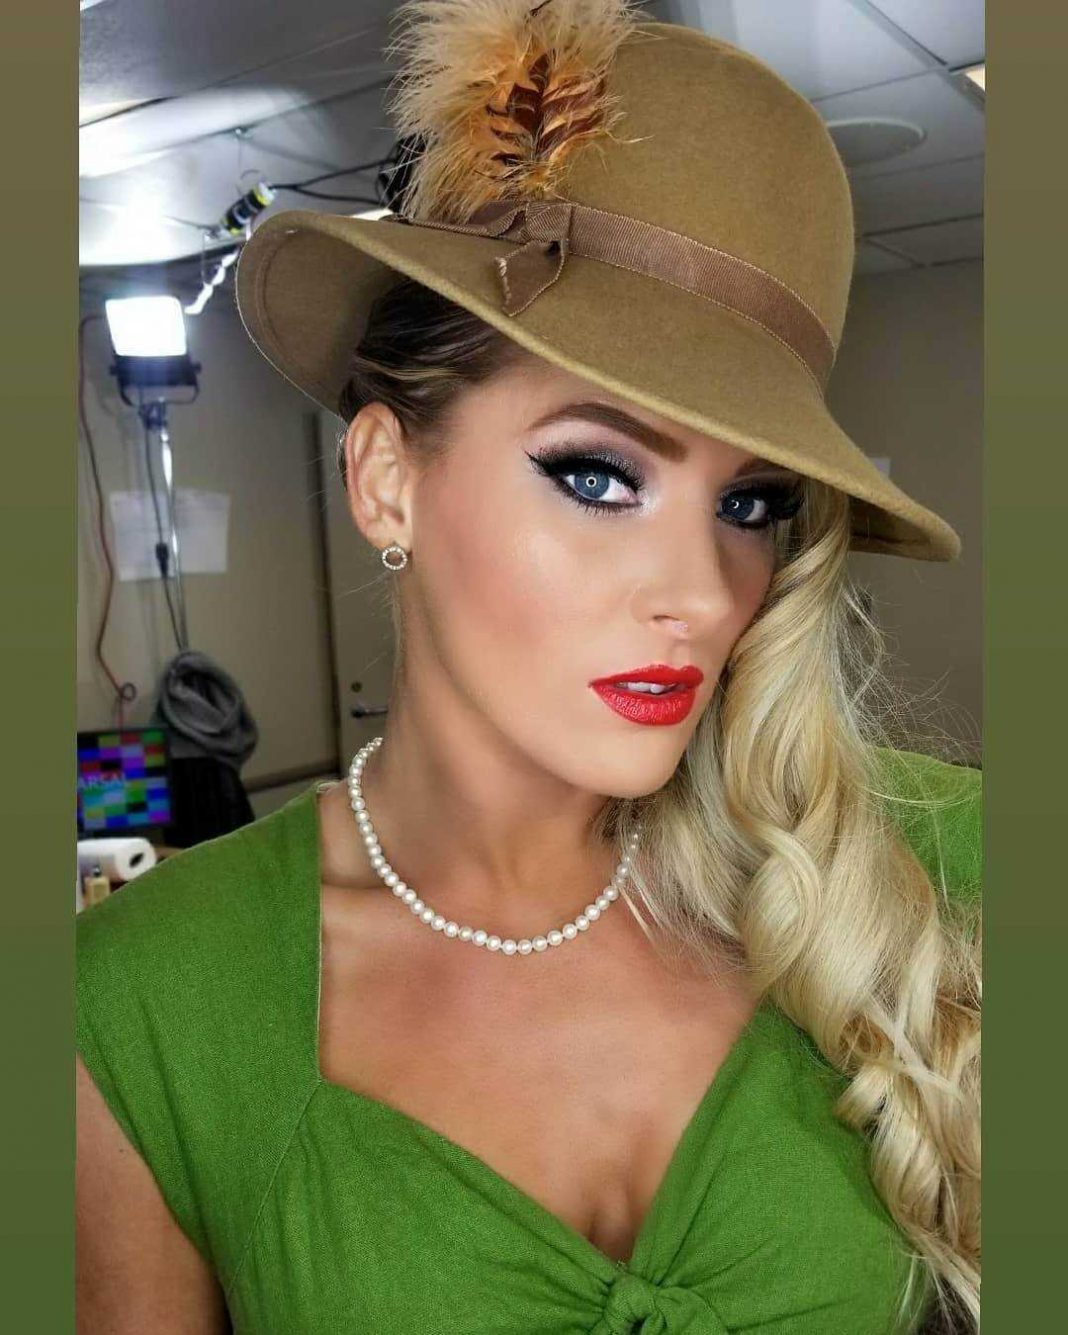 42 Lacey Evans Nude Pictures Present Her Polarizing Appeal 16